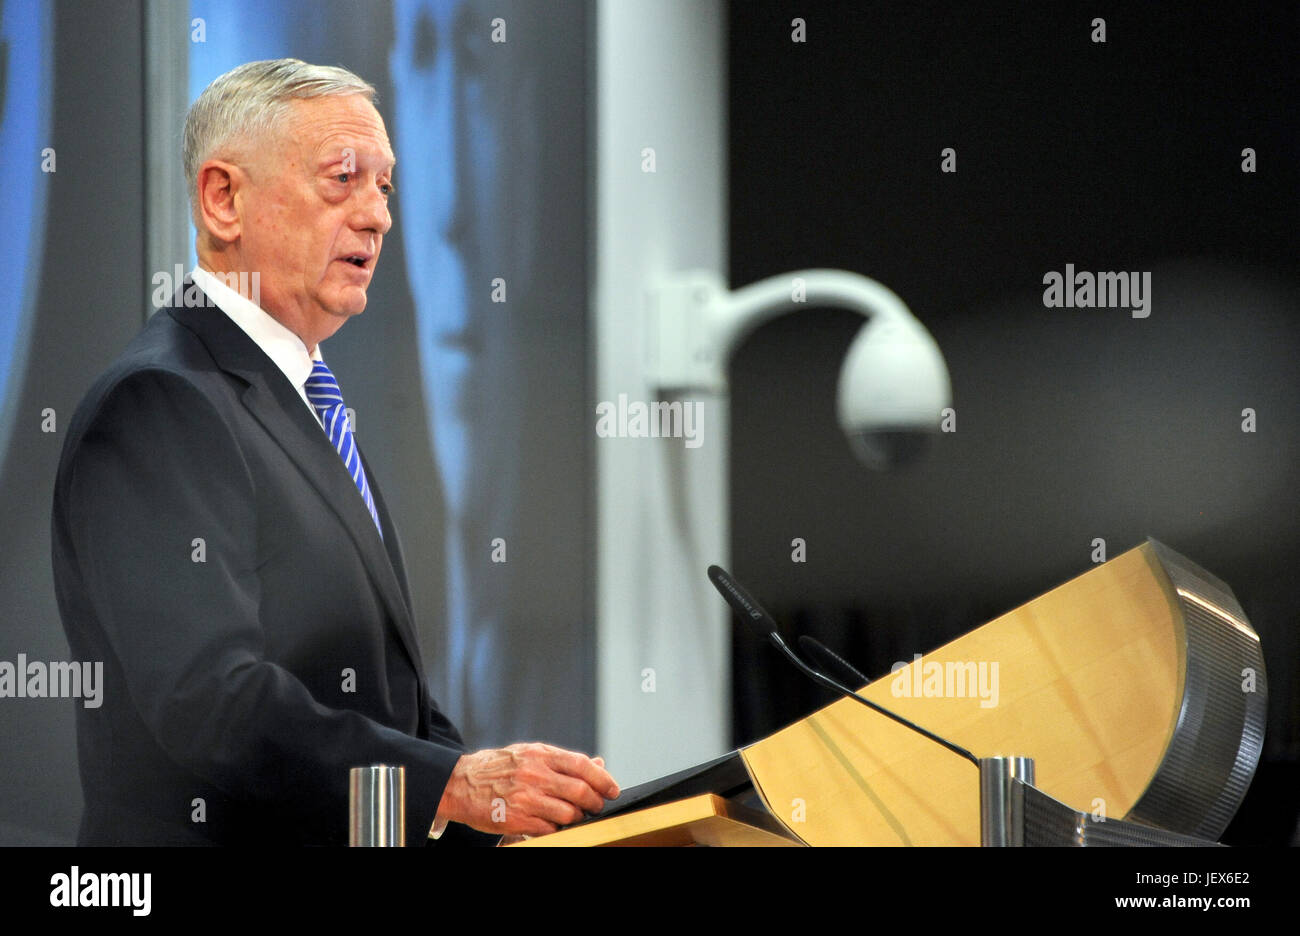 Garmisch-Partenkirchen, Germany. 28th June, 2017. United States Secretary of Defense, James Mattis, speaks during a ceremonial act on the occasion of the 70th anniversary of the 'Marshall Plan' in Garmisch-Partenkirchen, Germany, 28 June 2017. Photo: Fabian Nitschmann/dpa/Alamy Live News Stock Photo